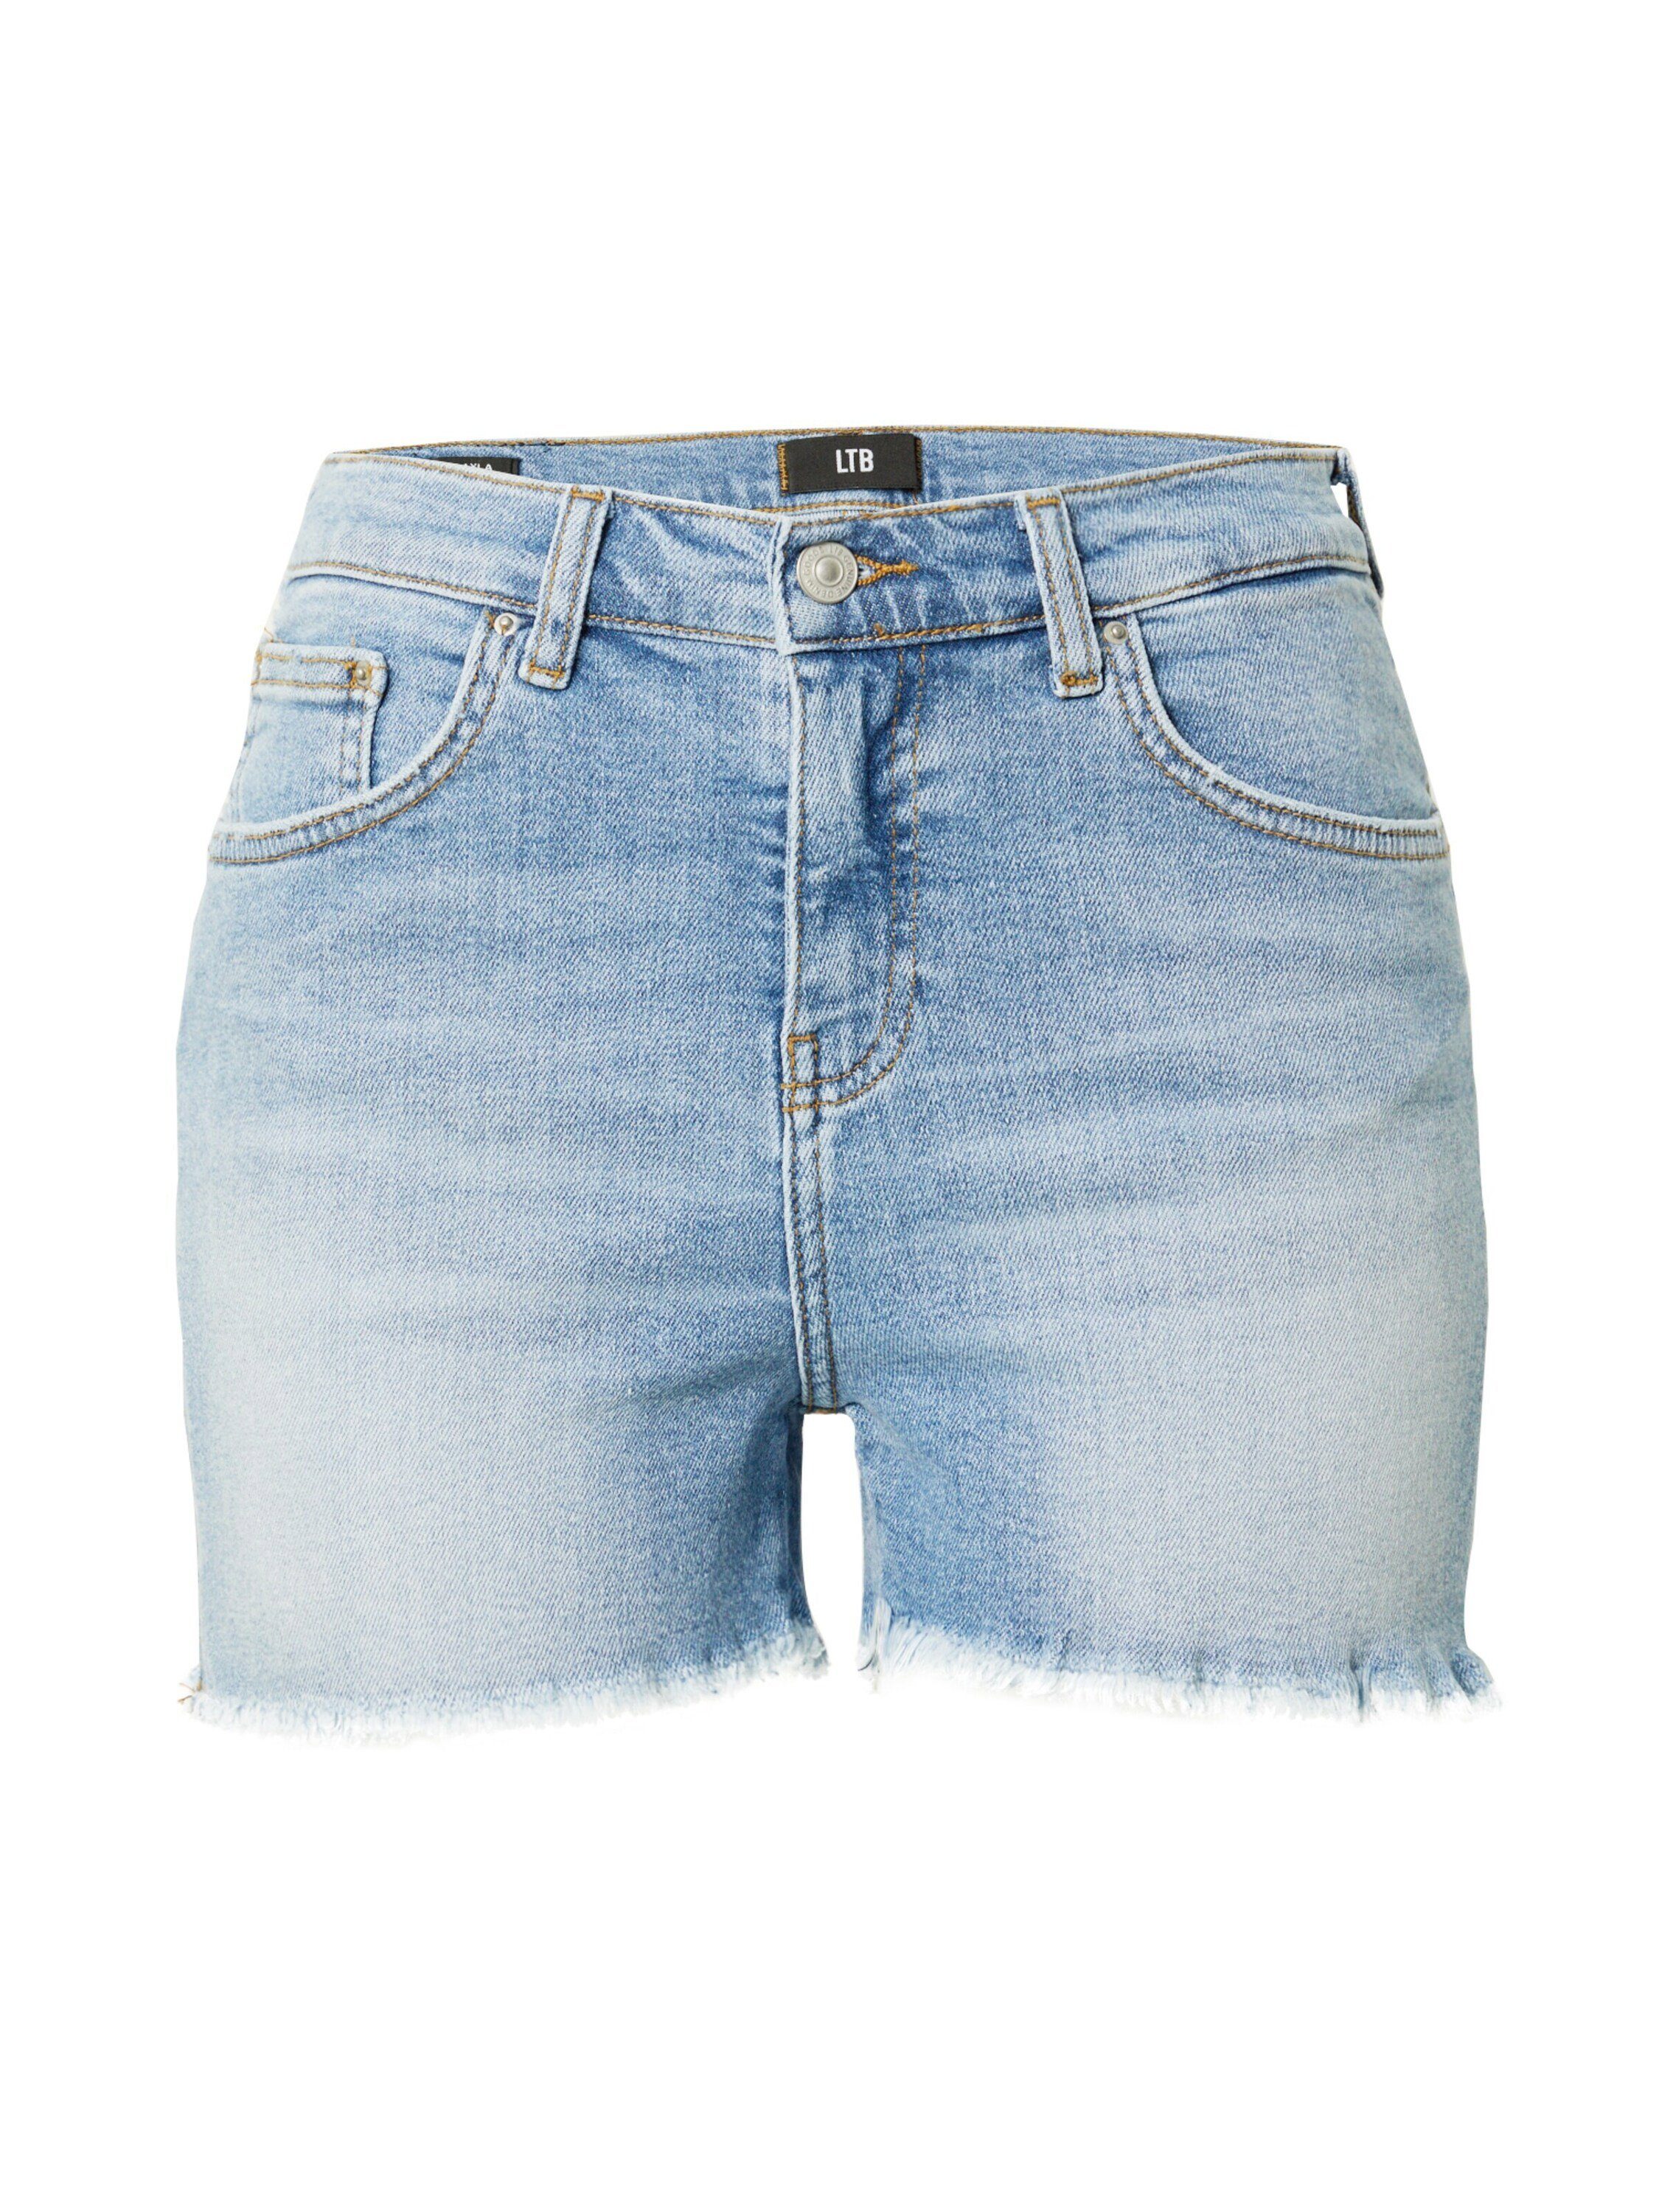 LAYLA Weiteres LTB Detail Jeansshorts (1-tlg) Patches,